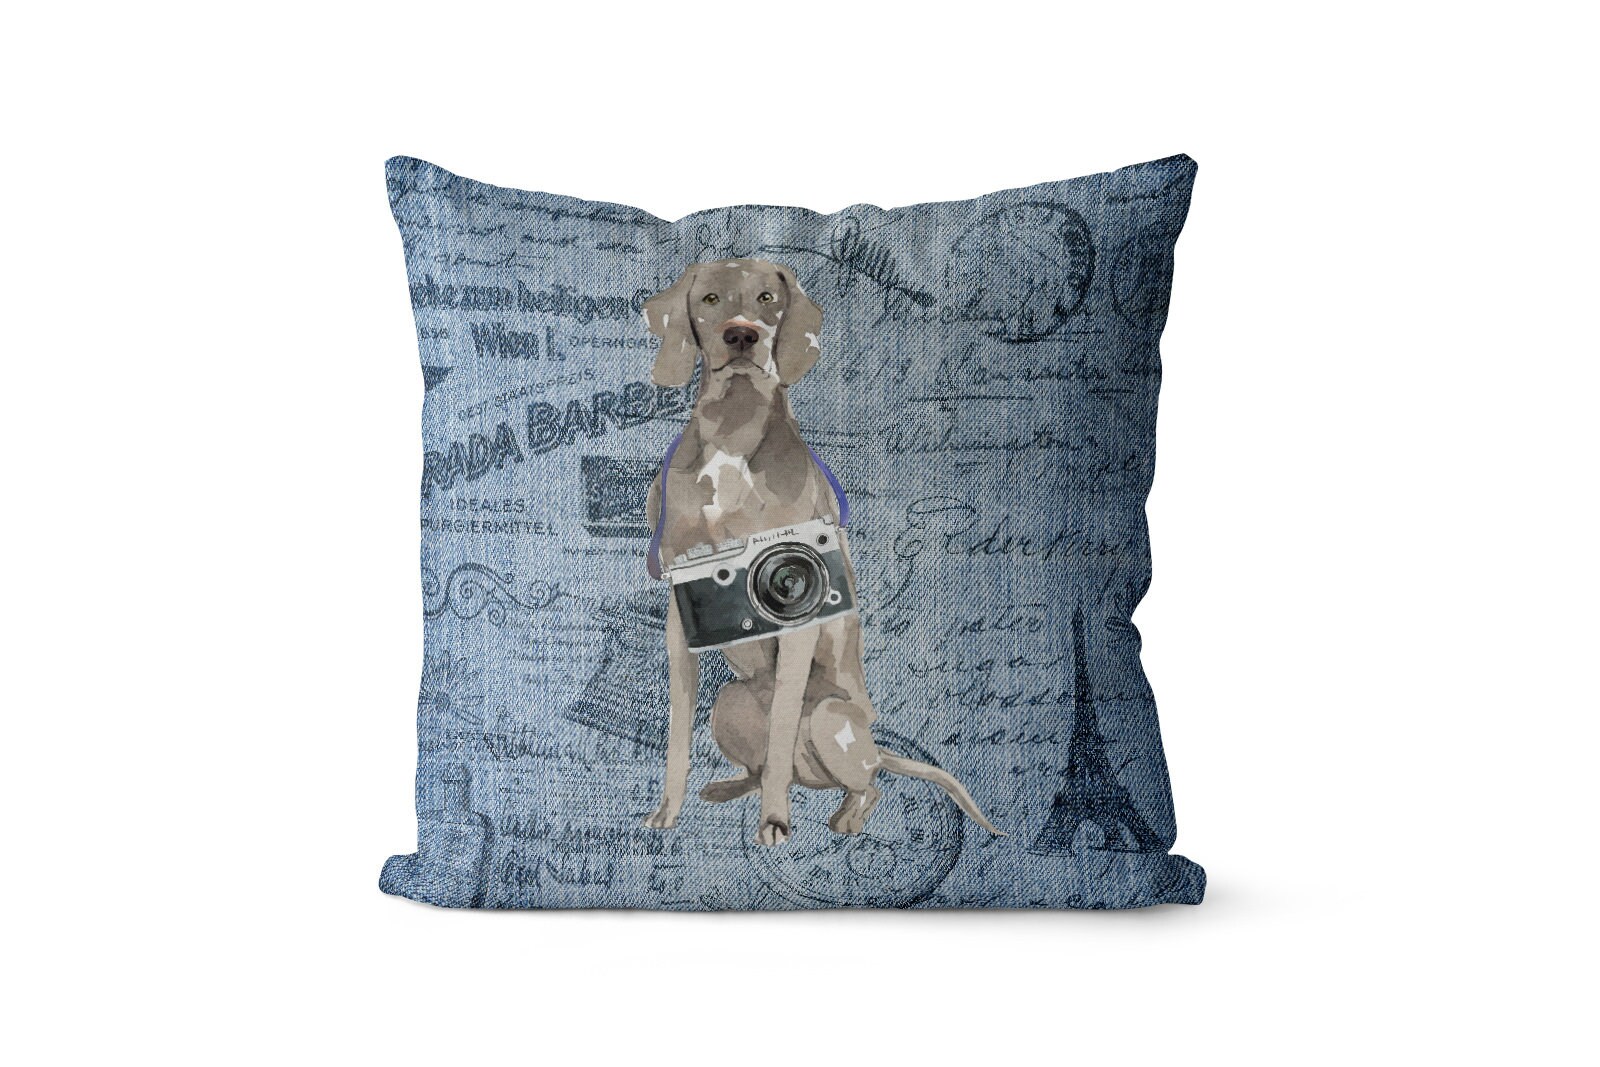 Weimaraner Dog Inspired Throw Pillow - Large Denim Style Cushion With Filling Available in Linen Or Velour